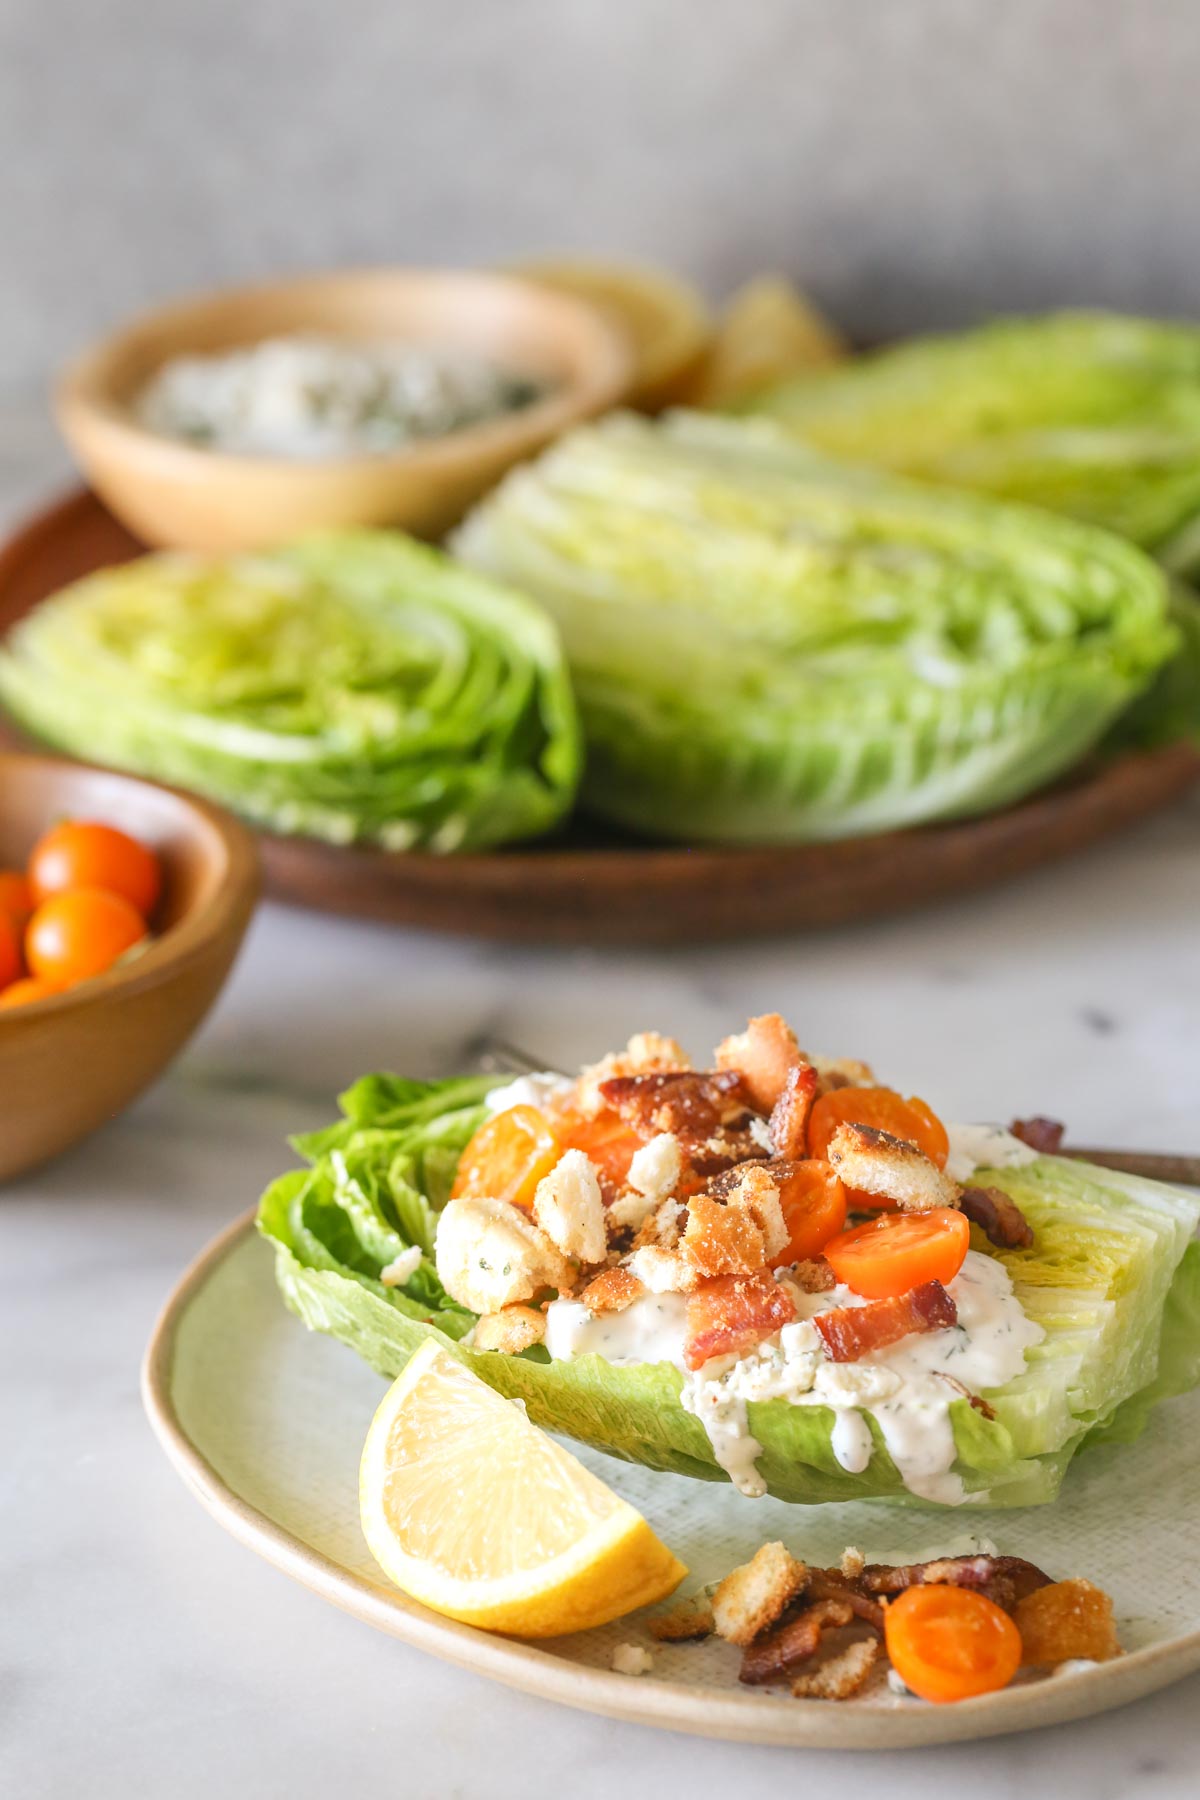 A Wedge Style BLT Salad on a plate with a lemon wedge, with a wood bowl of Sungold tomatoes and a wood platter with the romaine lettuce halves, a bowl of blue cheese dressing and lemon wedges on it in the background. 